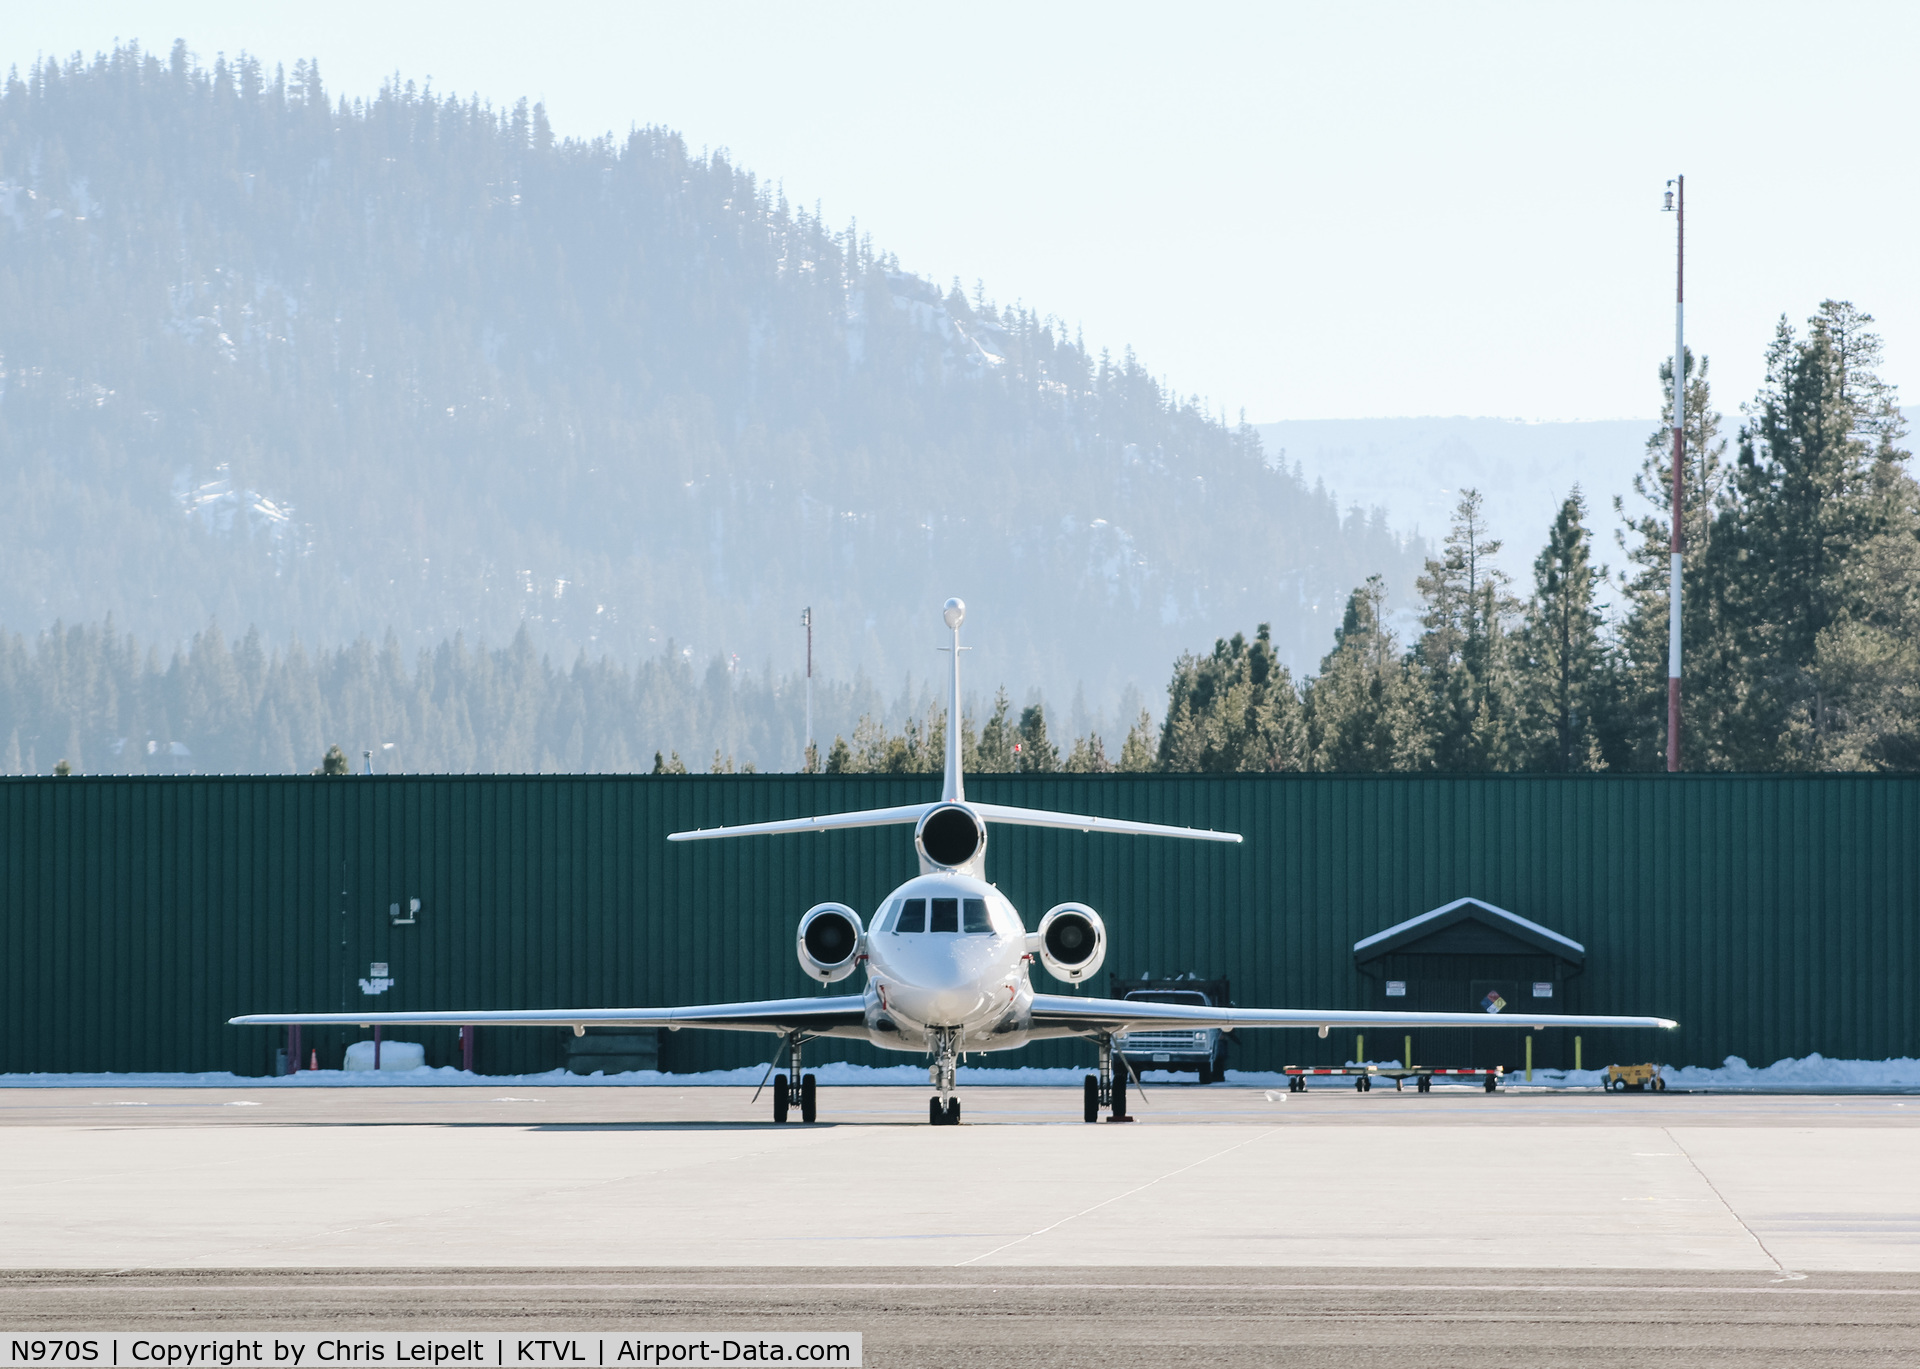 N970S, Dassault Falcon 50 C/N 238, Dassault Falcon 50 visiting from Florida visiting at South Lake Tahoe Airport, CA. Has since been repositioned to Texas in February 2018.